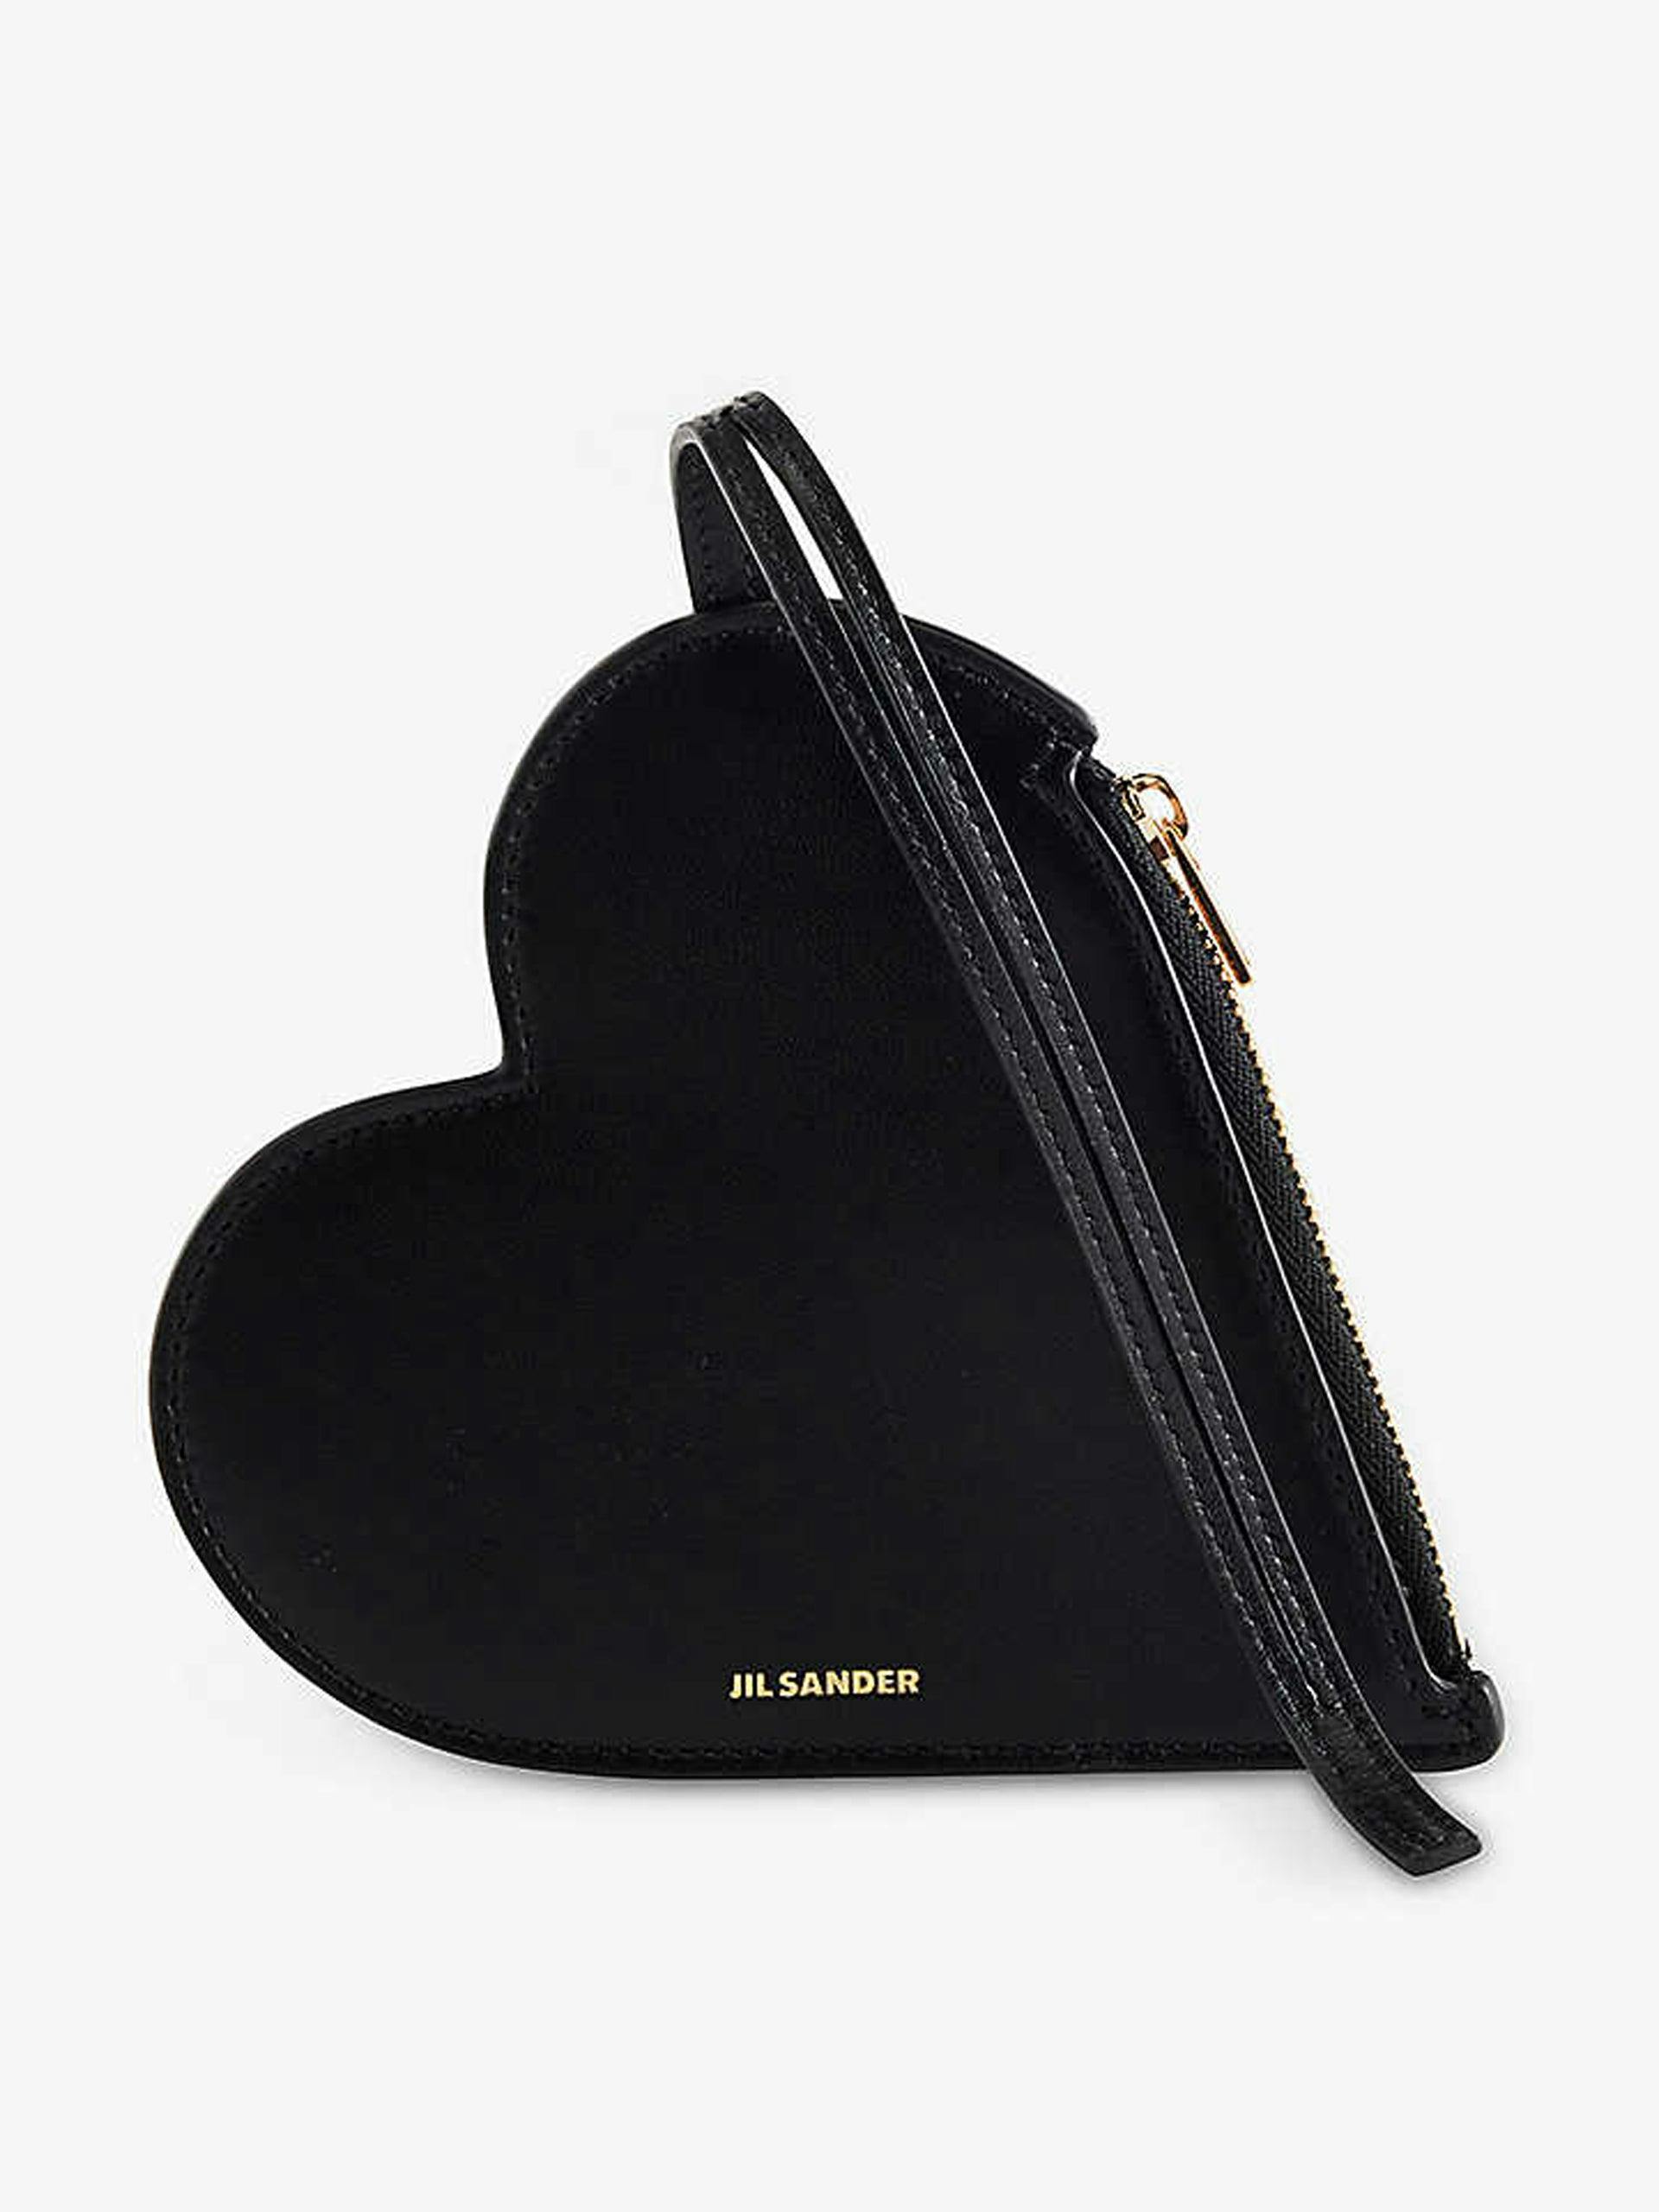 Heart-shaped leather pouch